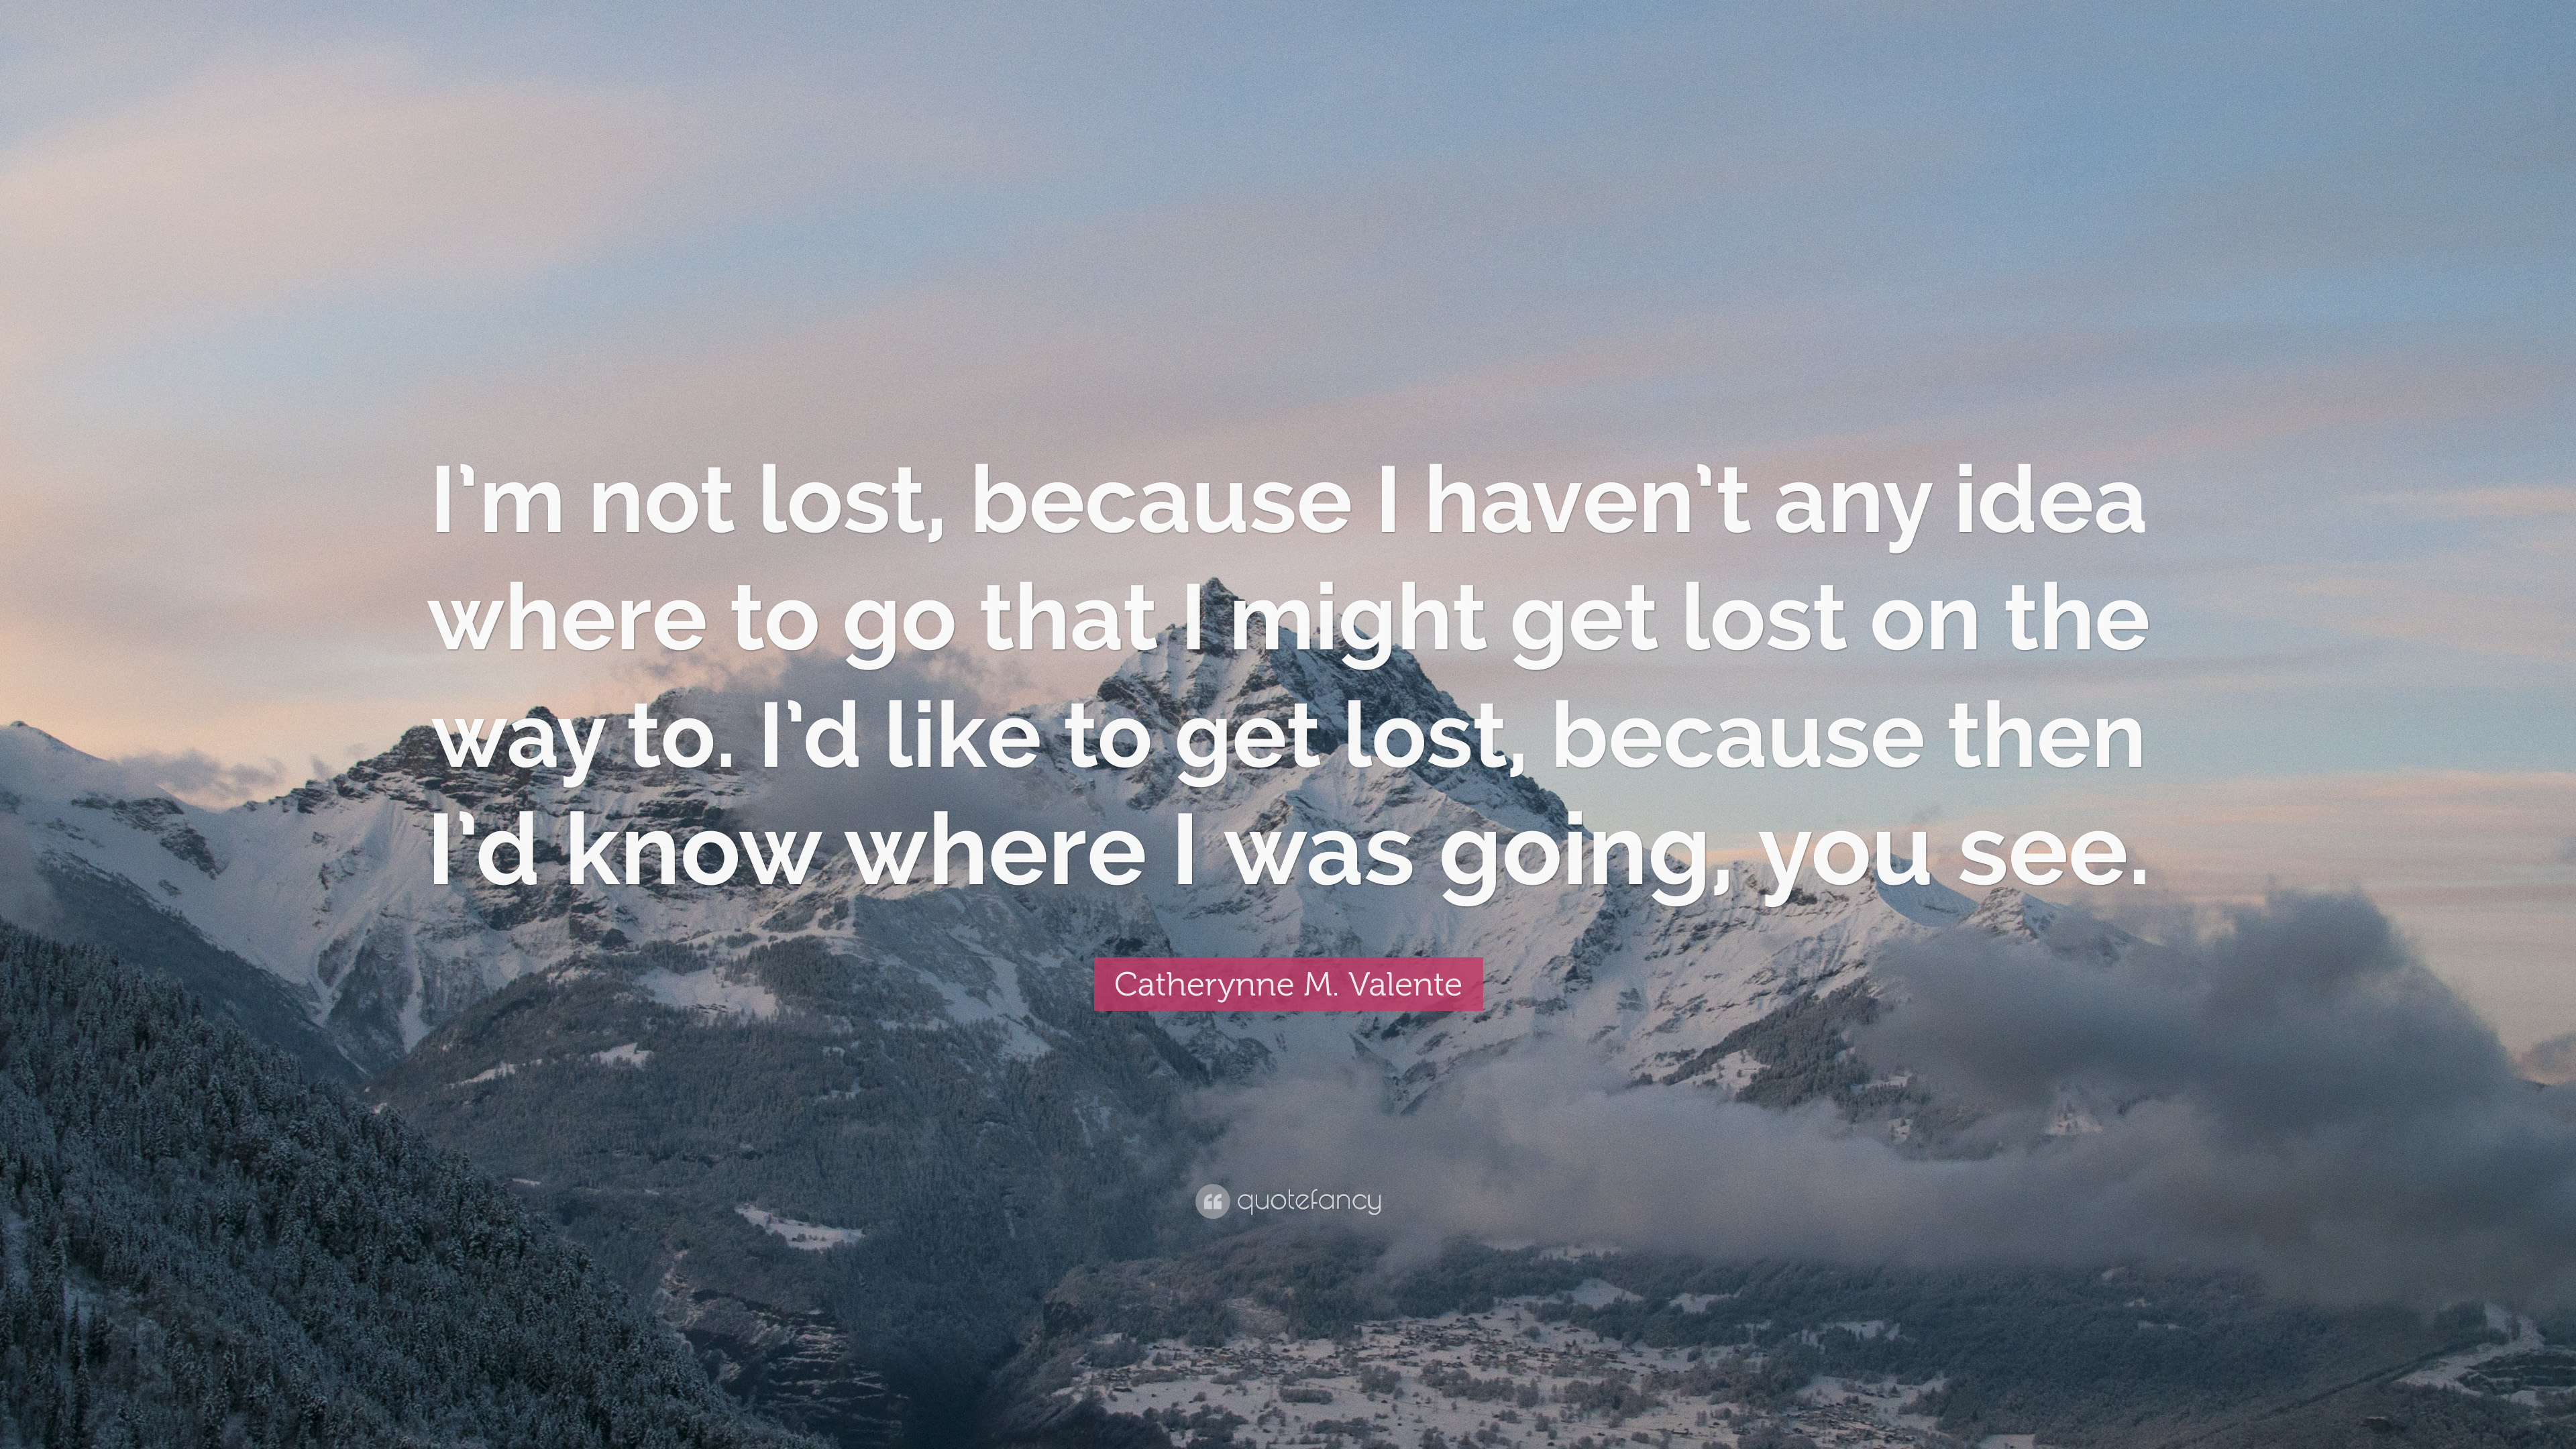 Catherynne M. Valente Quote: “I'm not lost, because I haven't any ...